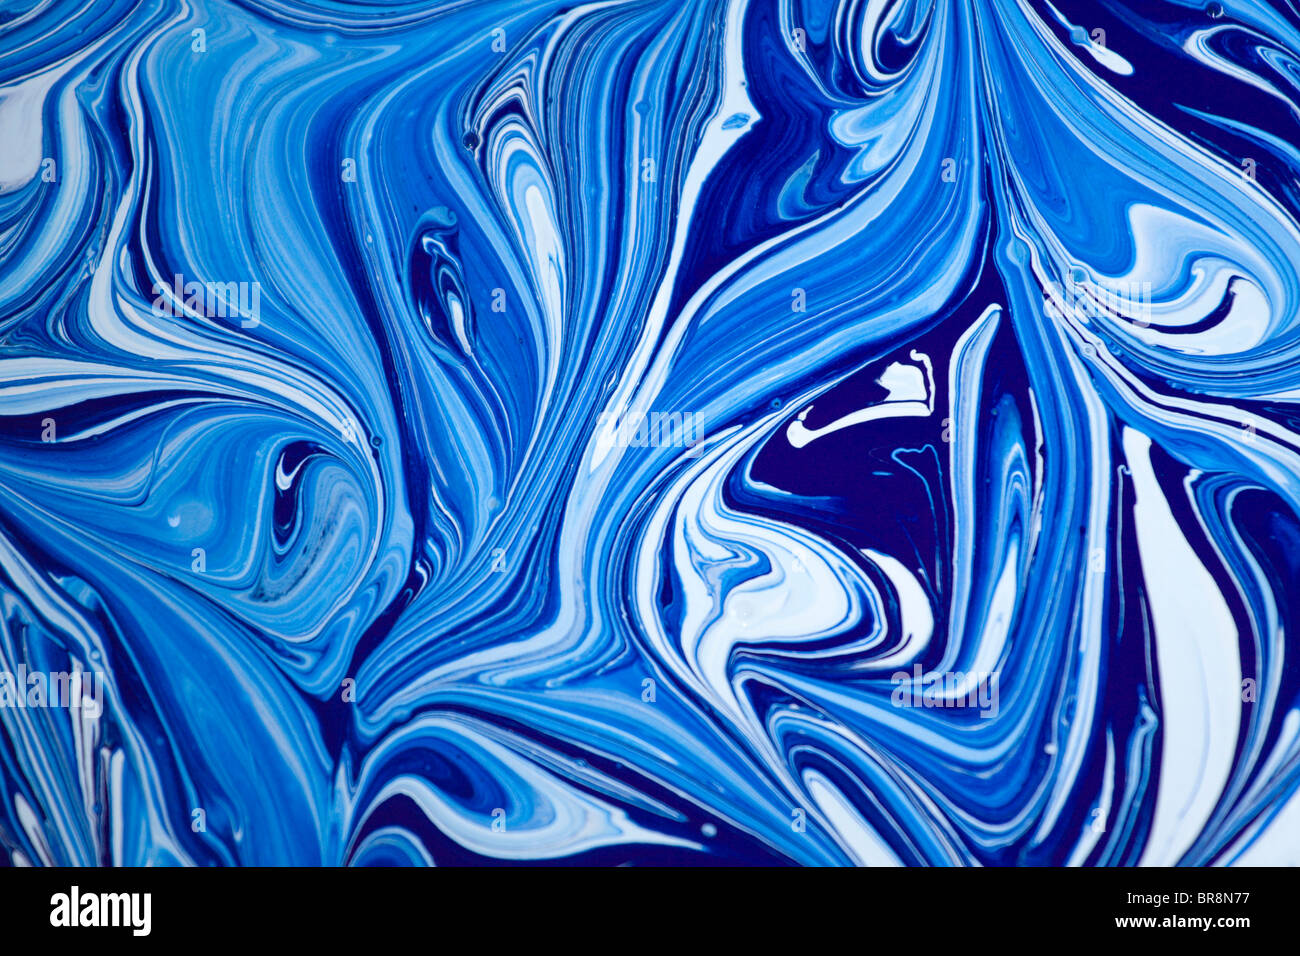 Abstract curves of mixing colors. Stock Photo